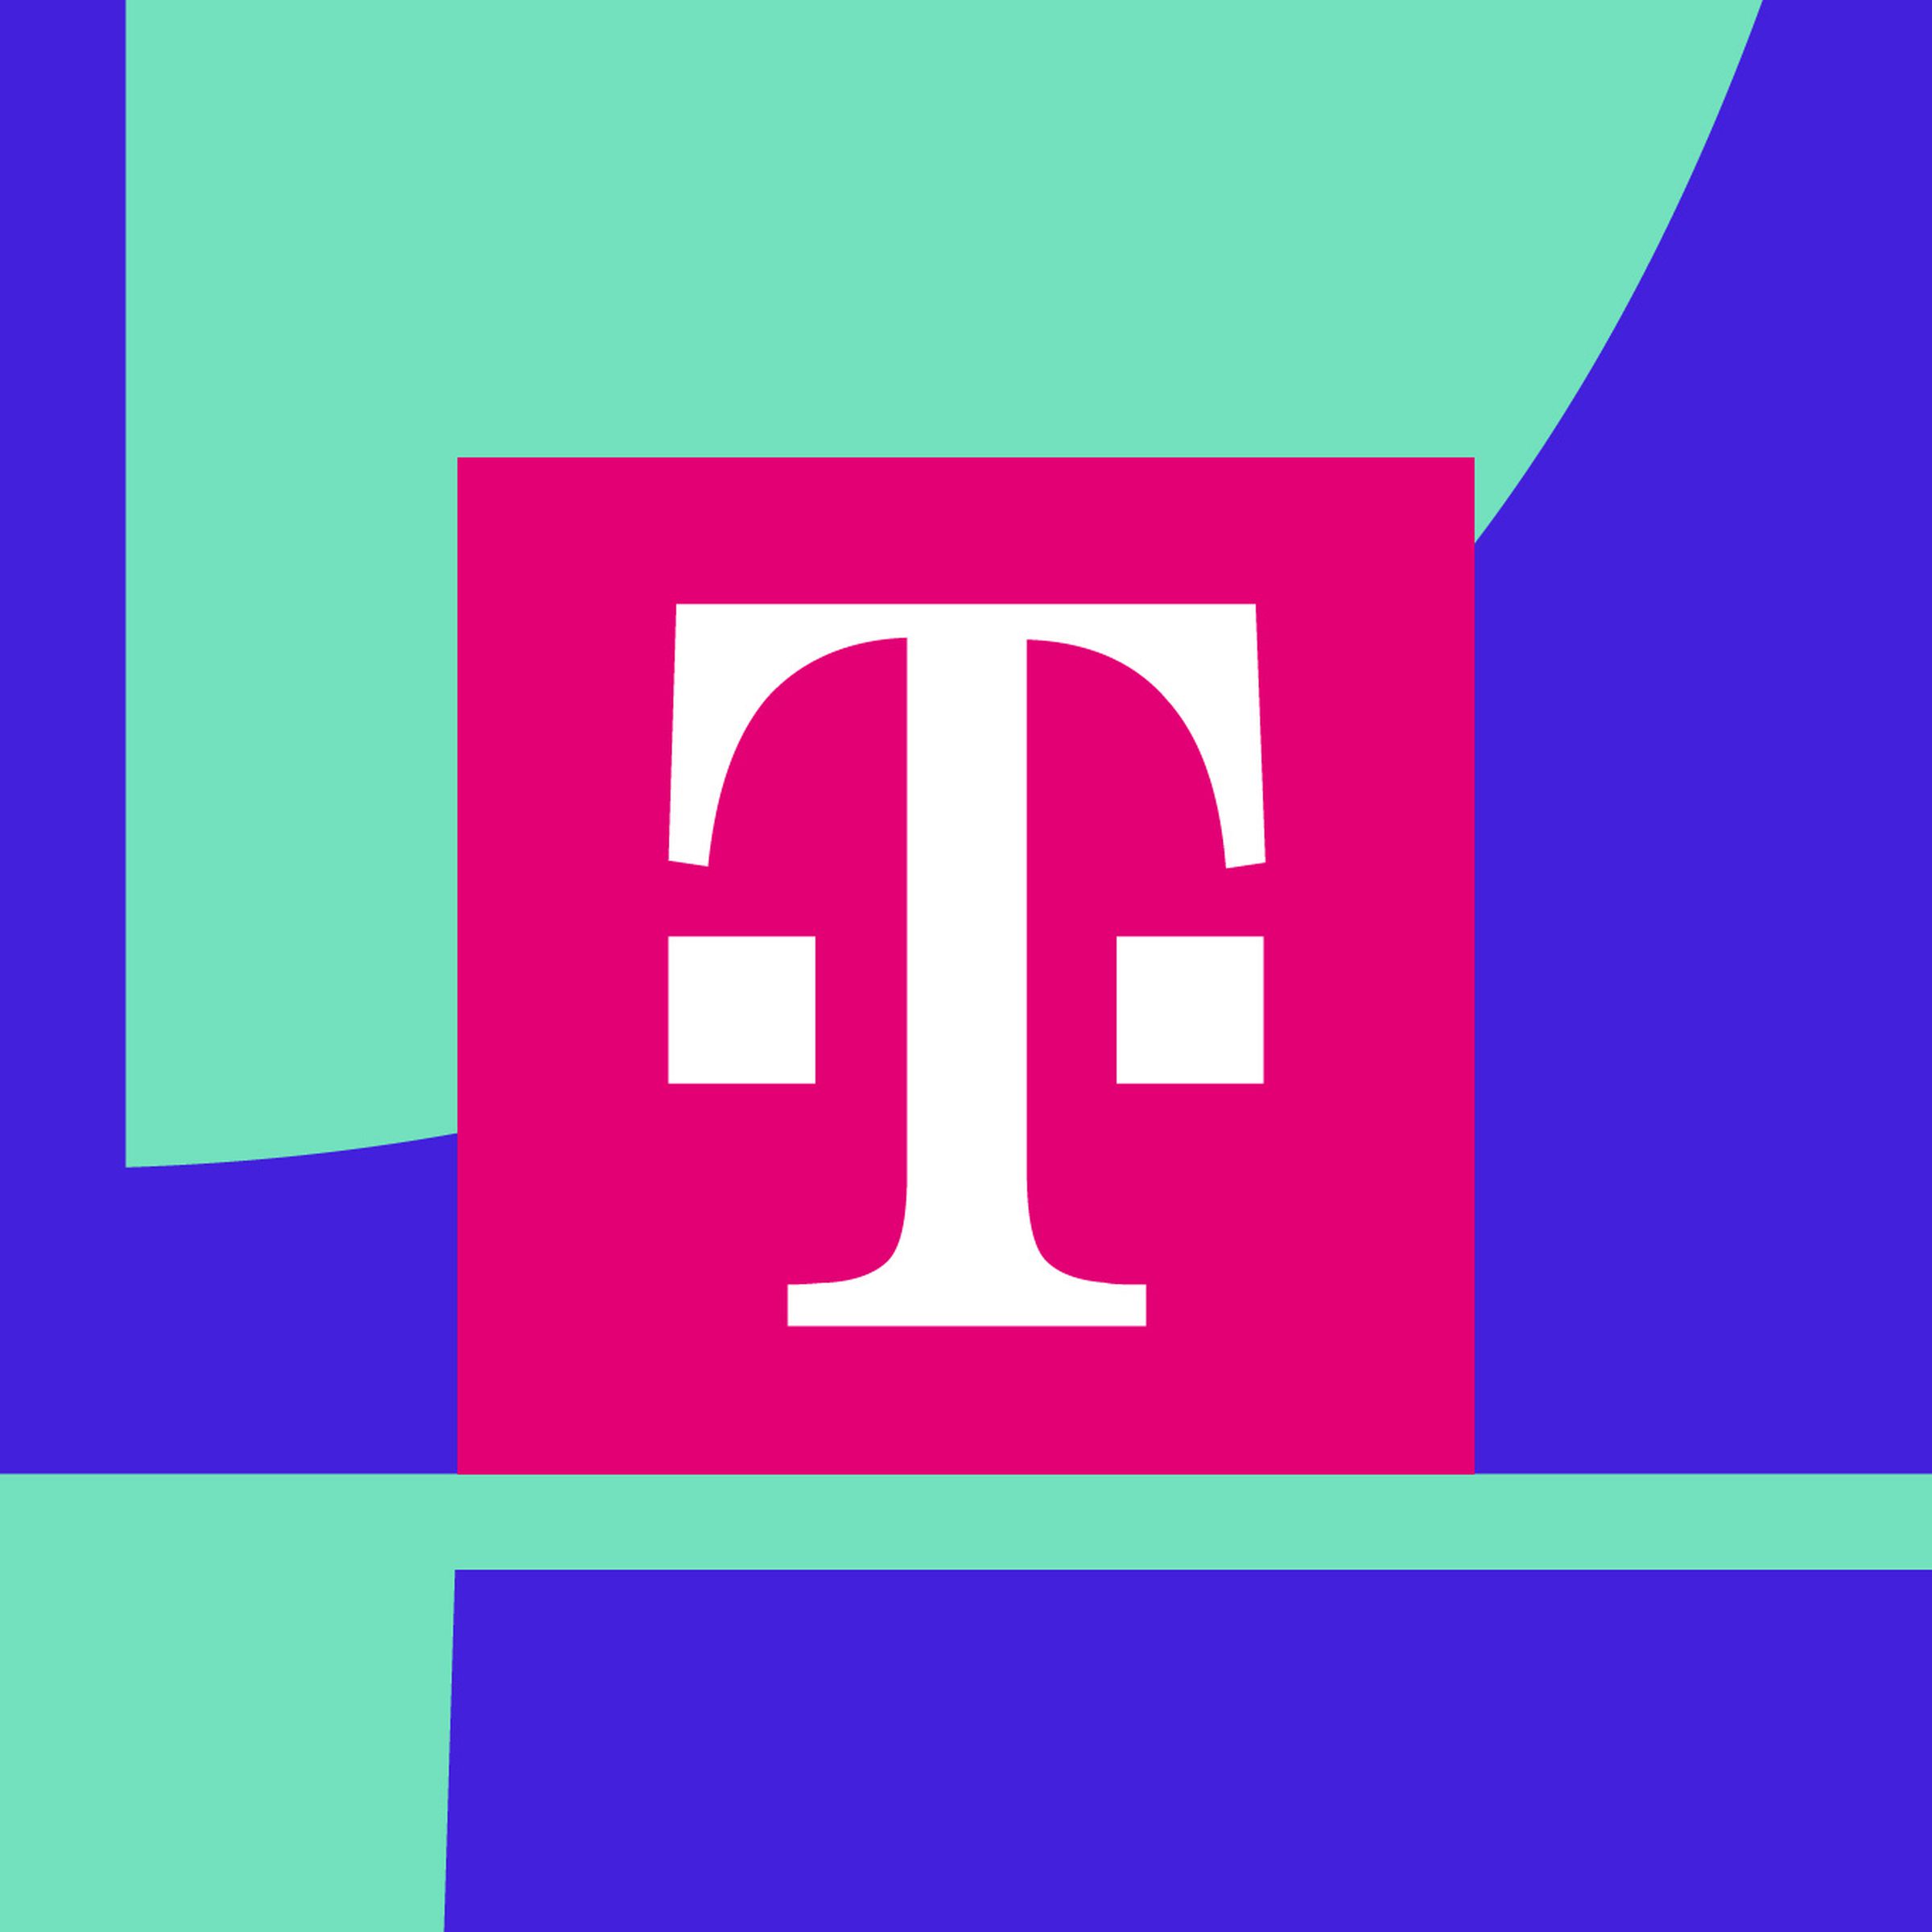 Illustration of the T-Mobile logo, the letter T in a pink box with two squares on either side of it, in front of a blue and aqua background.